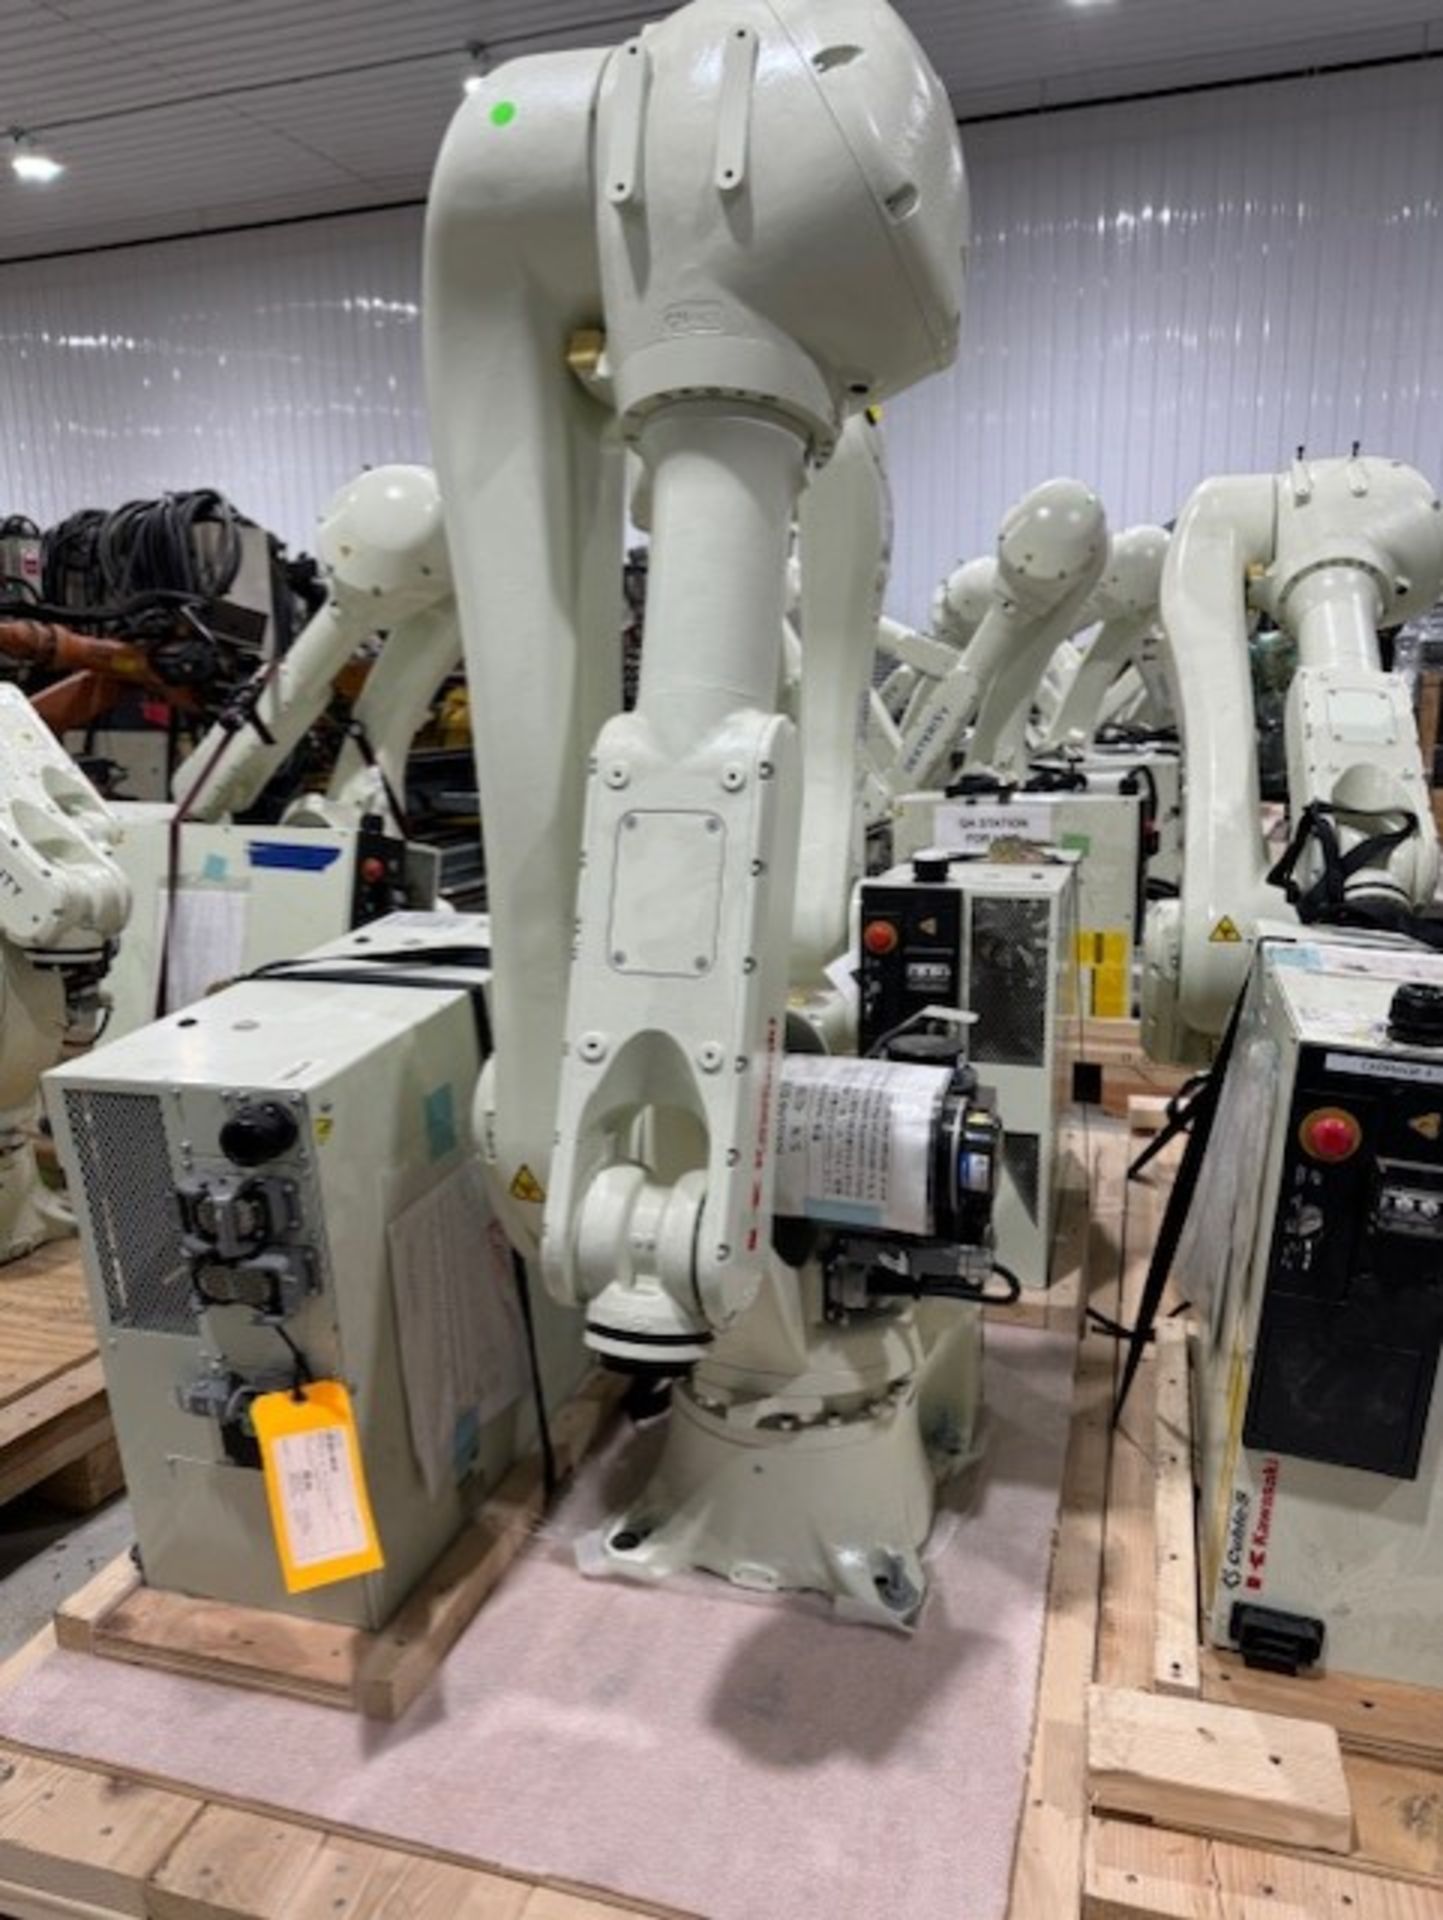 LIGHTLY USED KAWASAKI ROBOT RS020N, SN 4712, 20KG X 1725MM REACH WITH EO1 CONTROLS, CABLES & TEACH - Image 2 of 7